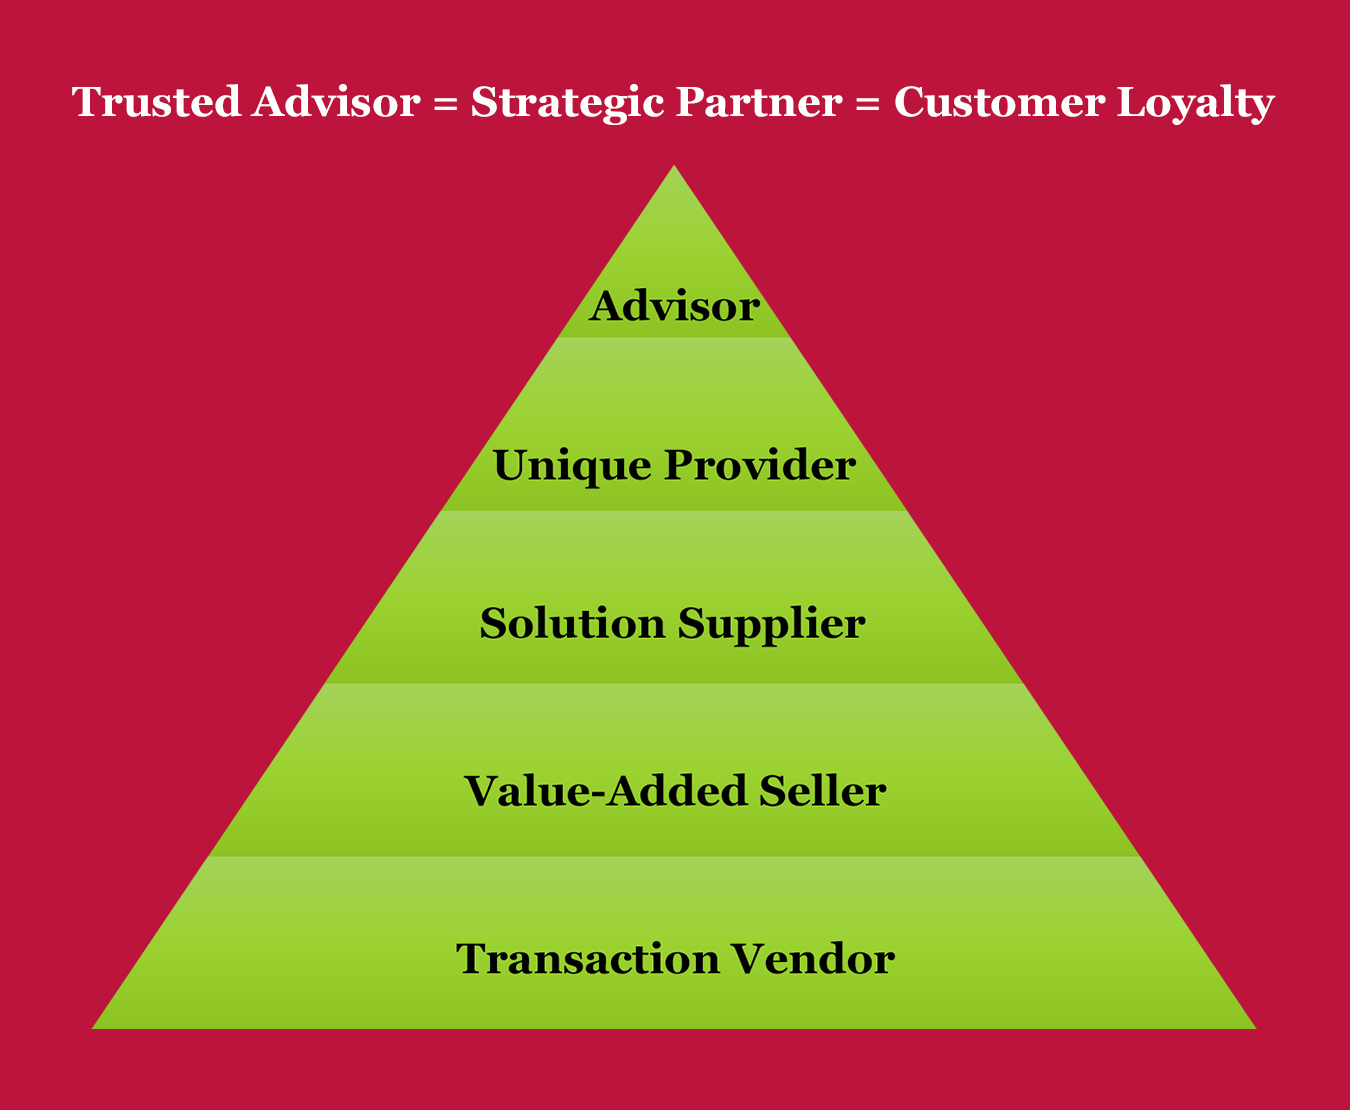 be a trusted advisor, not a vendor to foster genurine relationships with loyal customers